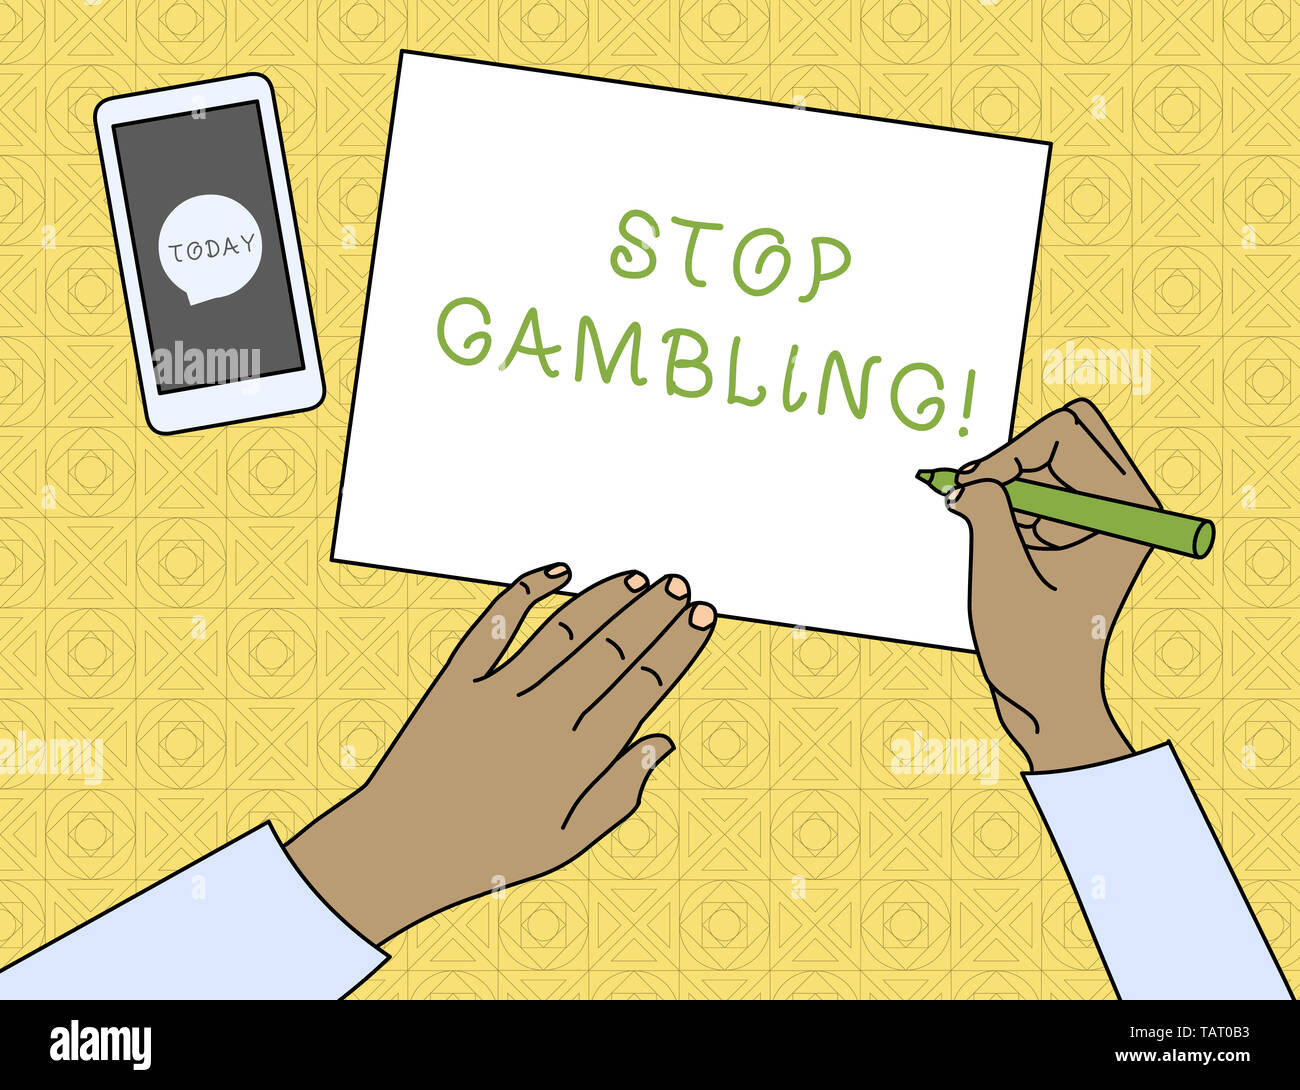 Apply These 5 Secret Techniques To Improve gambling